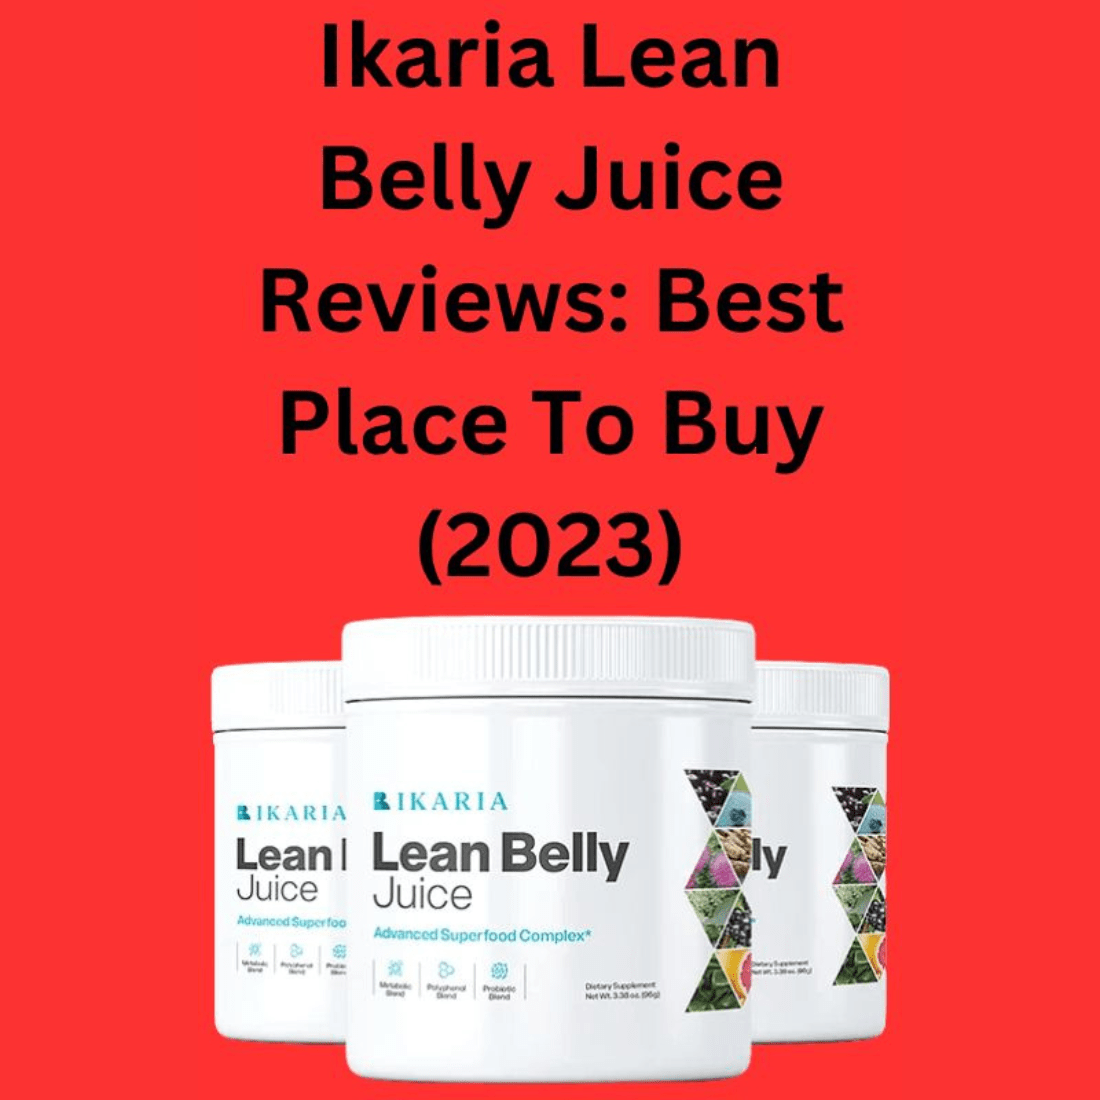 Ikaria Lean Belly Juice Reviews: Best Place To Buy (2023) preview image.